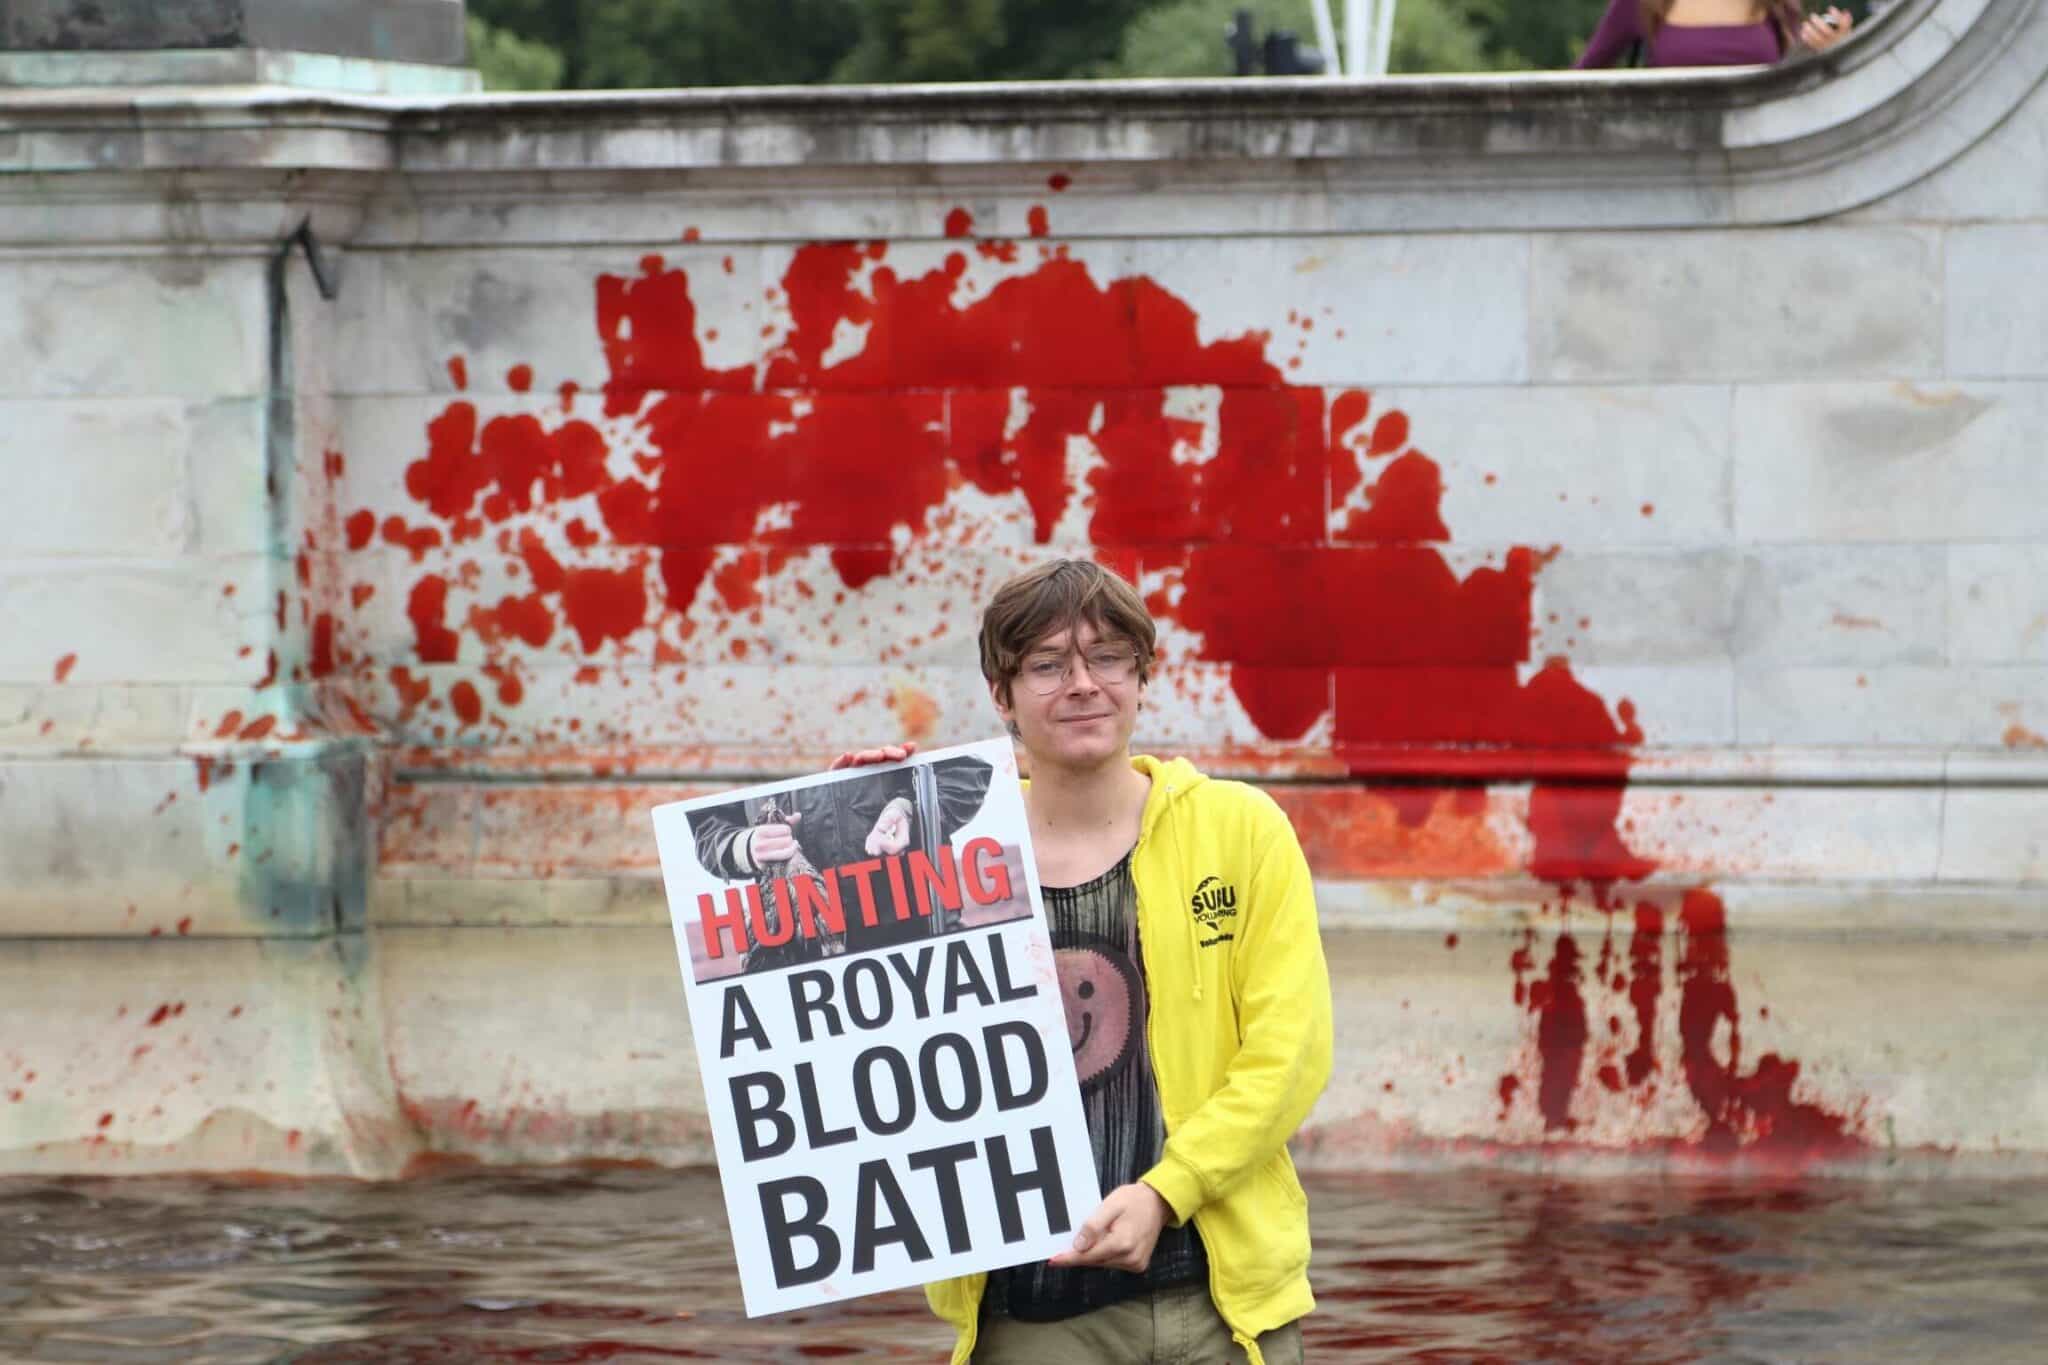 A young rebel standing inside the fountain holding a sign "Hunting, a royal blood bath"